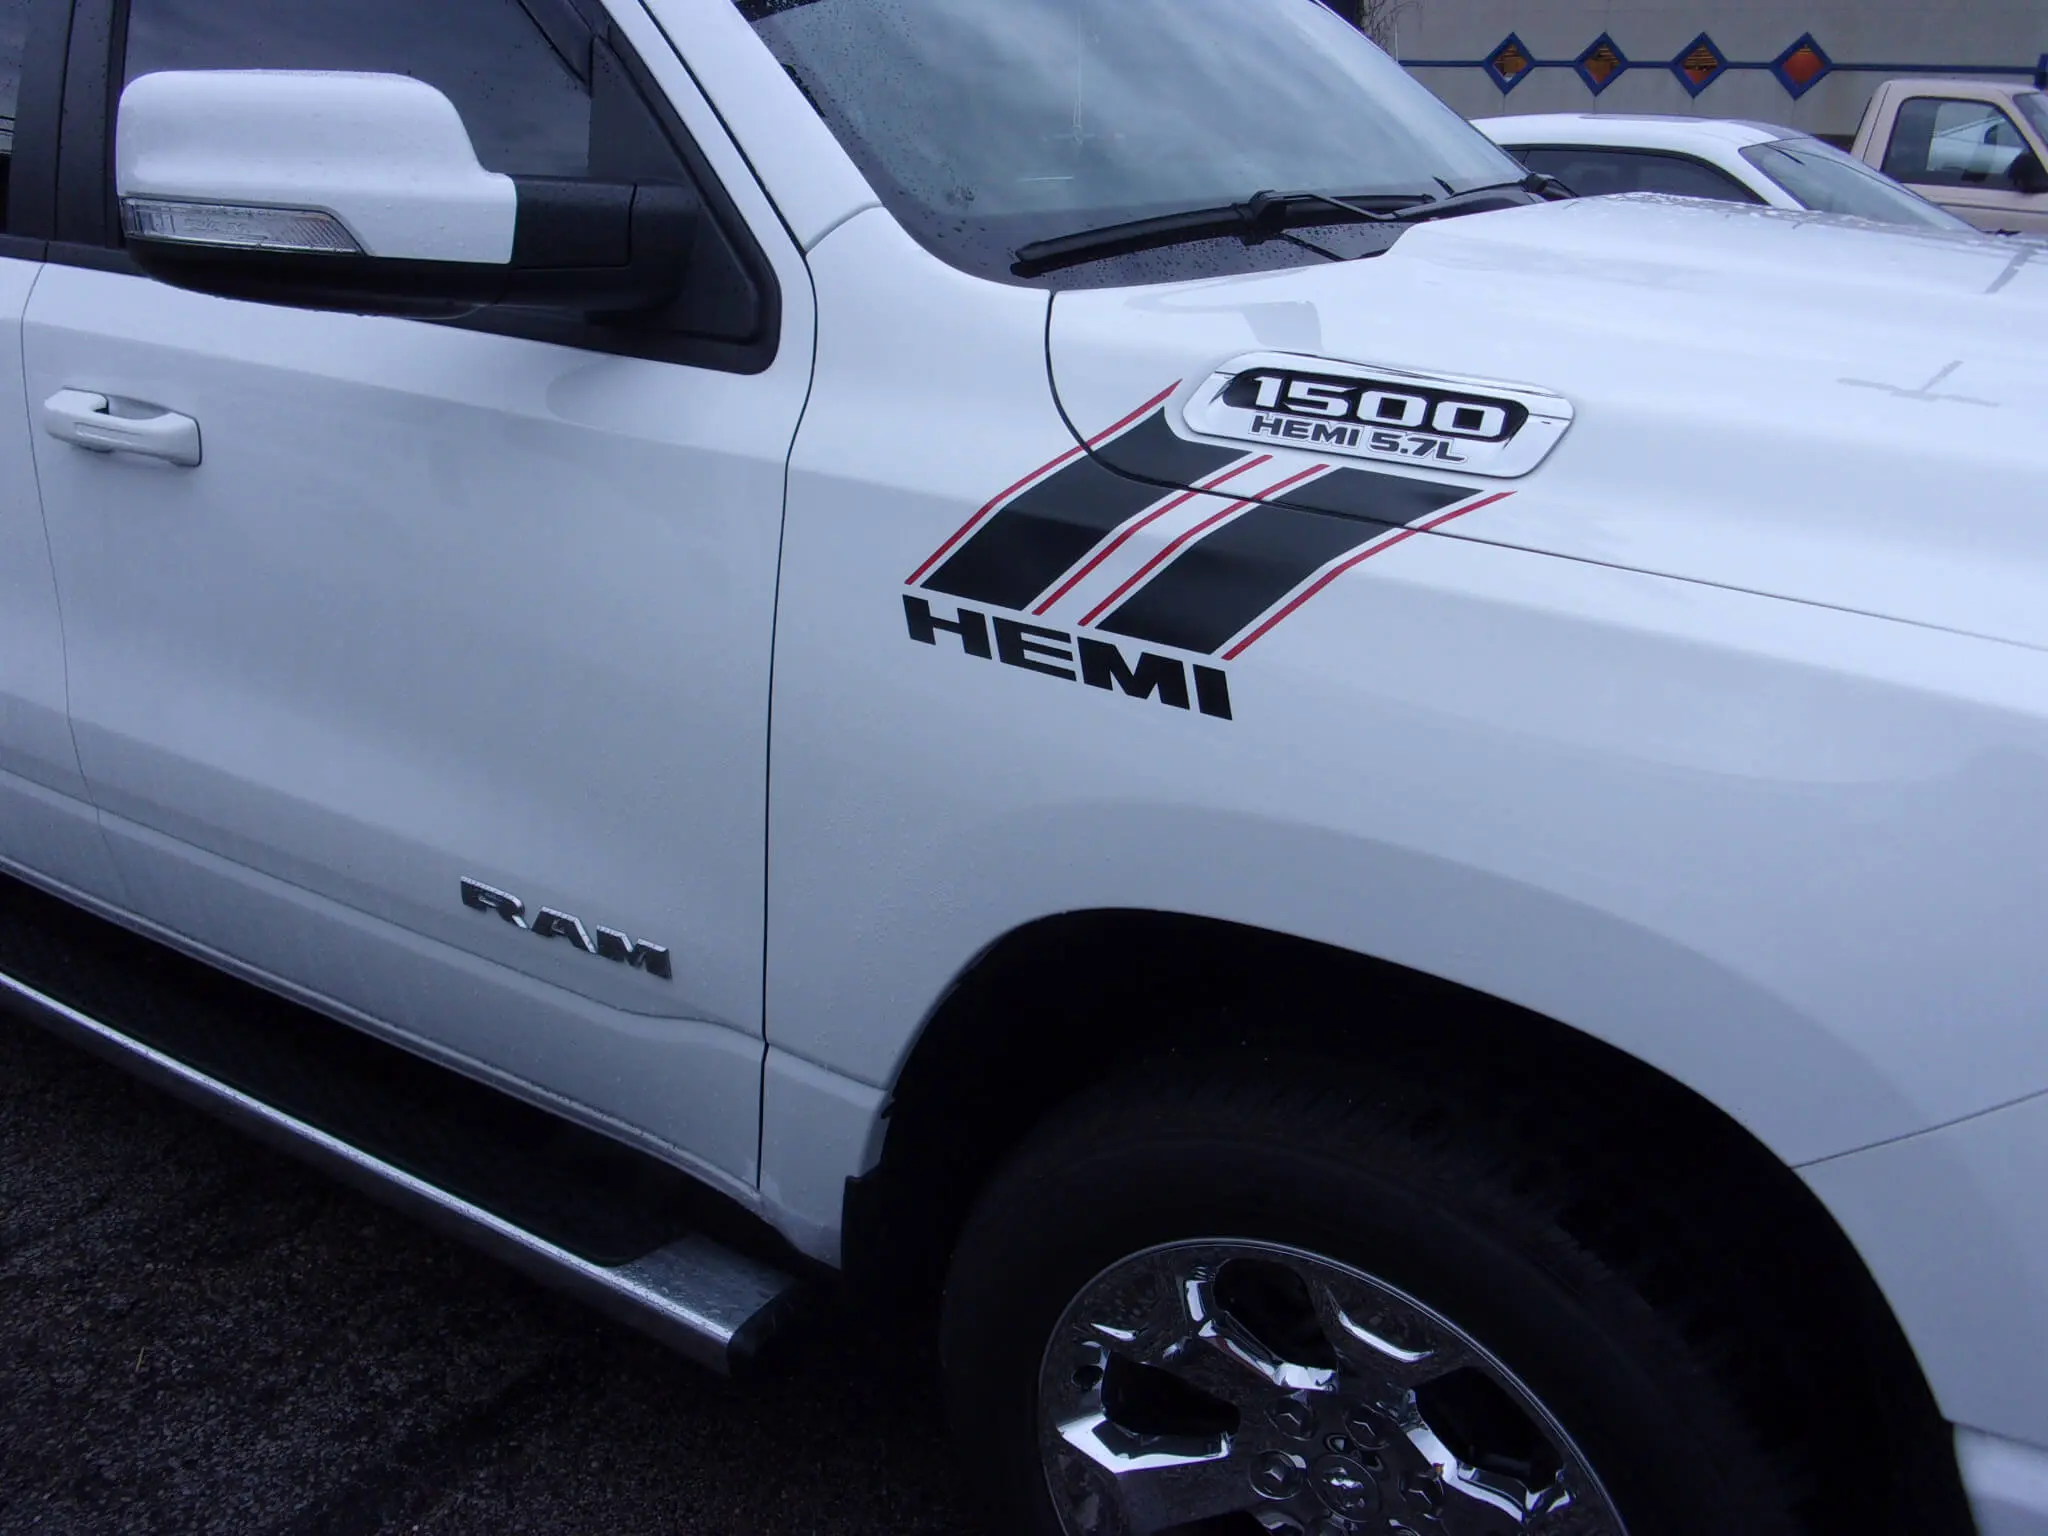 BUY and CUSTOMIZE Dodge RAM 1500 - Hood to Fender Hash Stripes